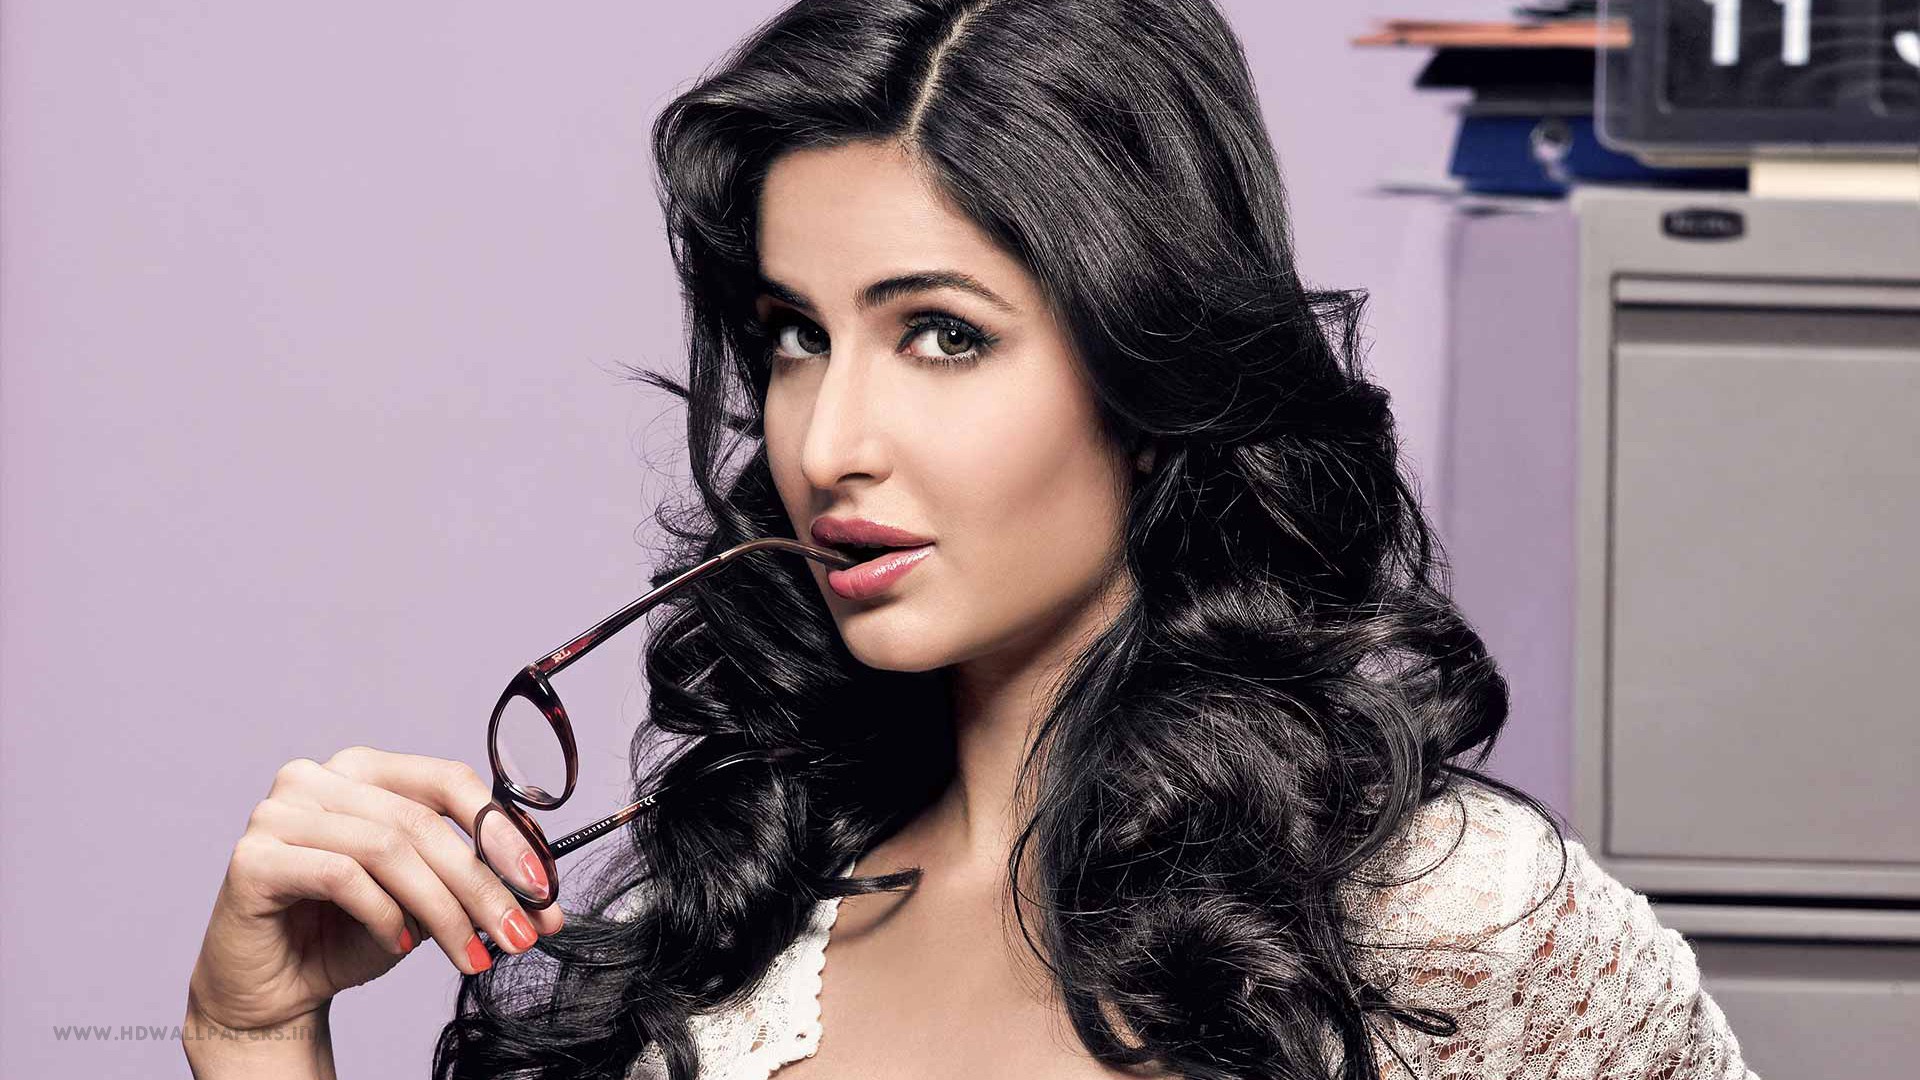 20 Best Katrina Kaif Wallpapers and Photos Collection Page-1 | Welcomenri